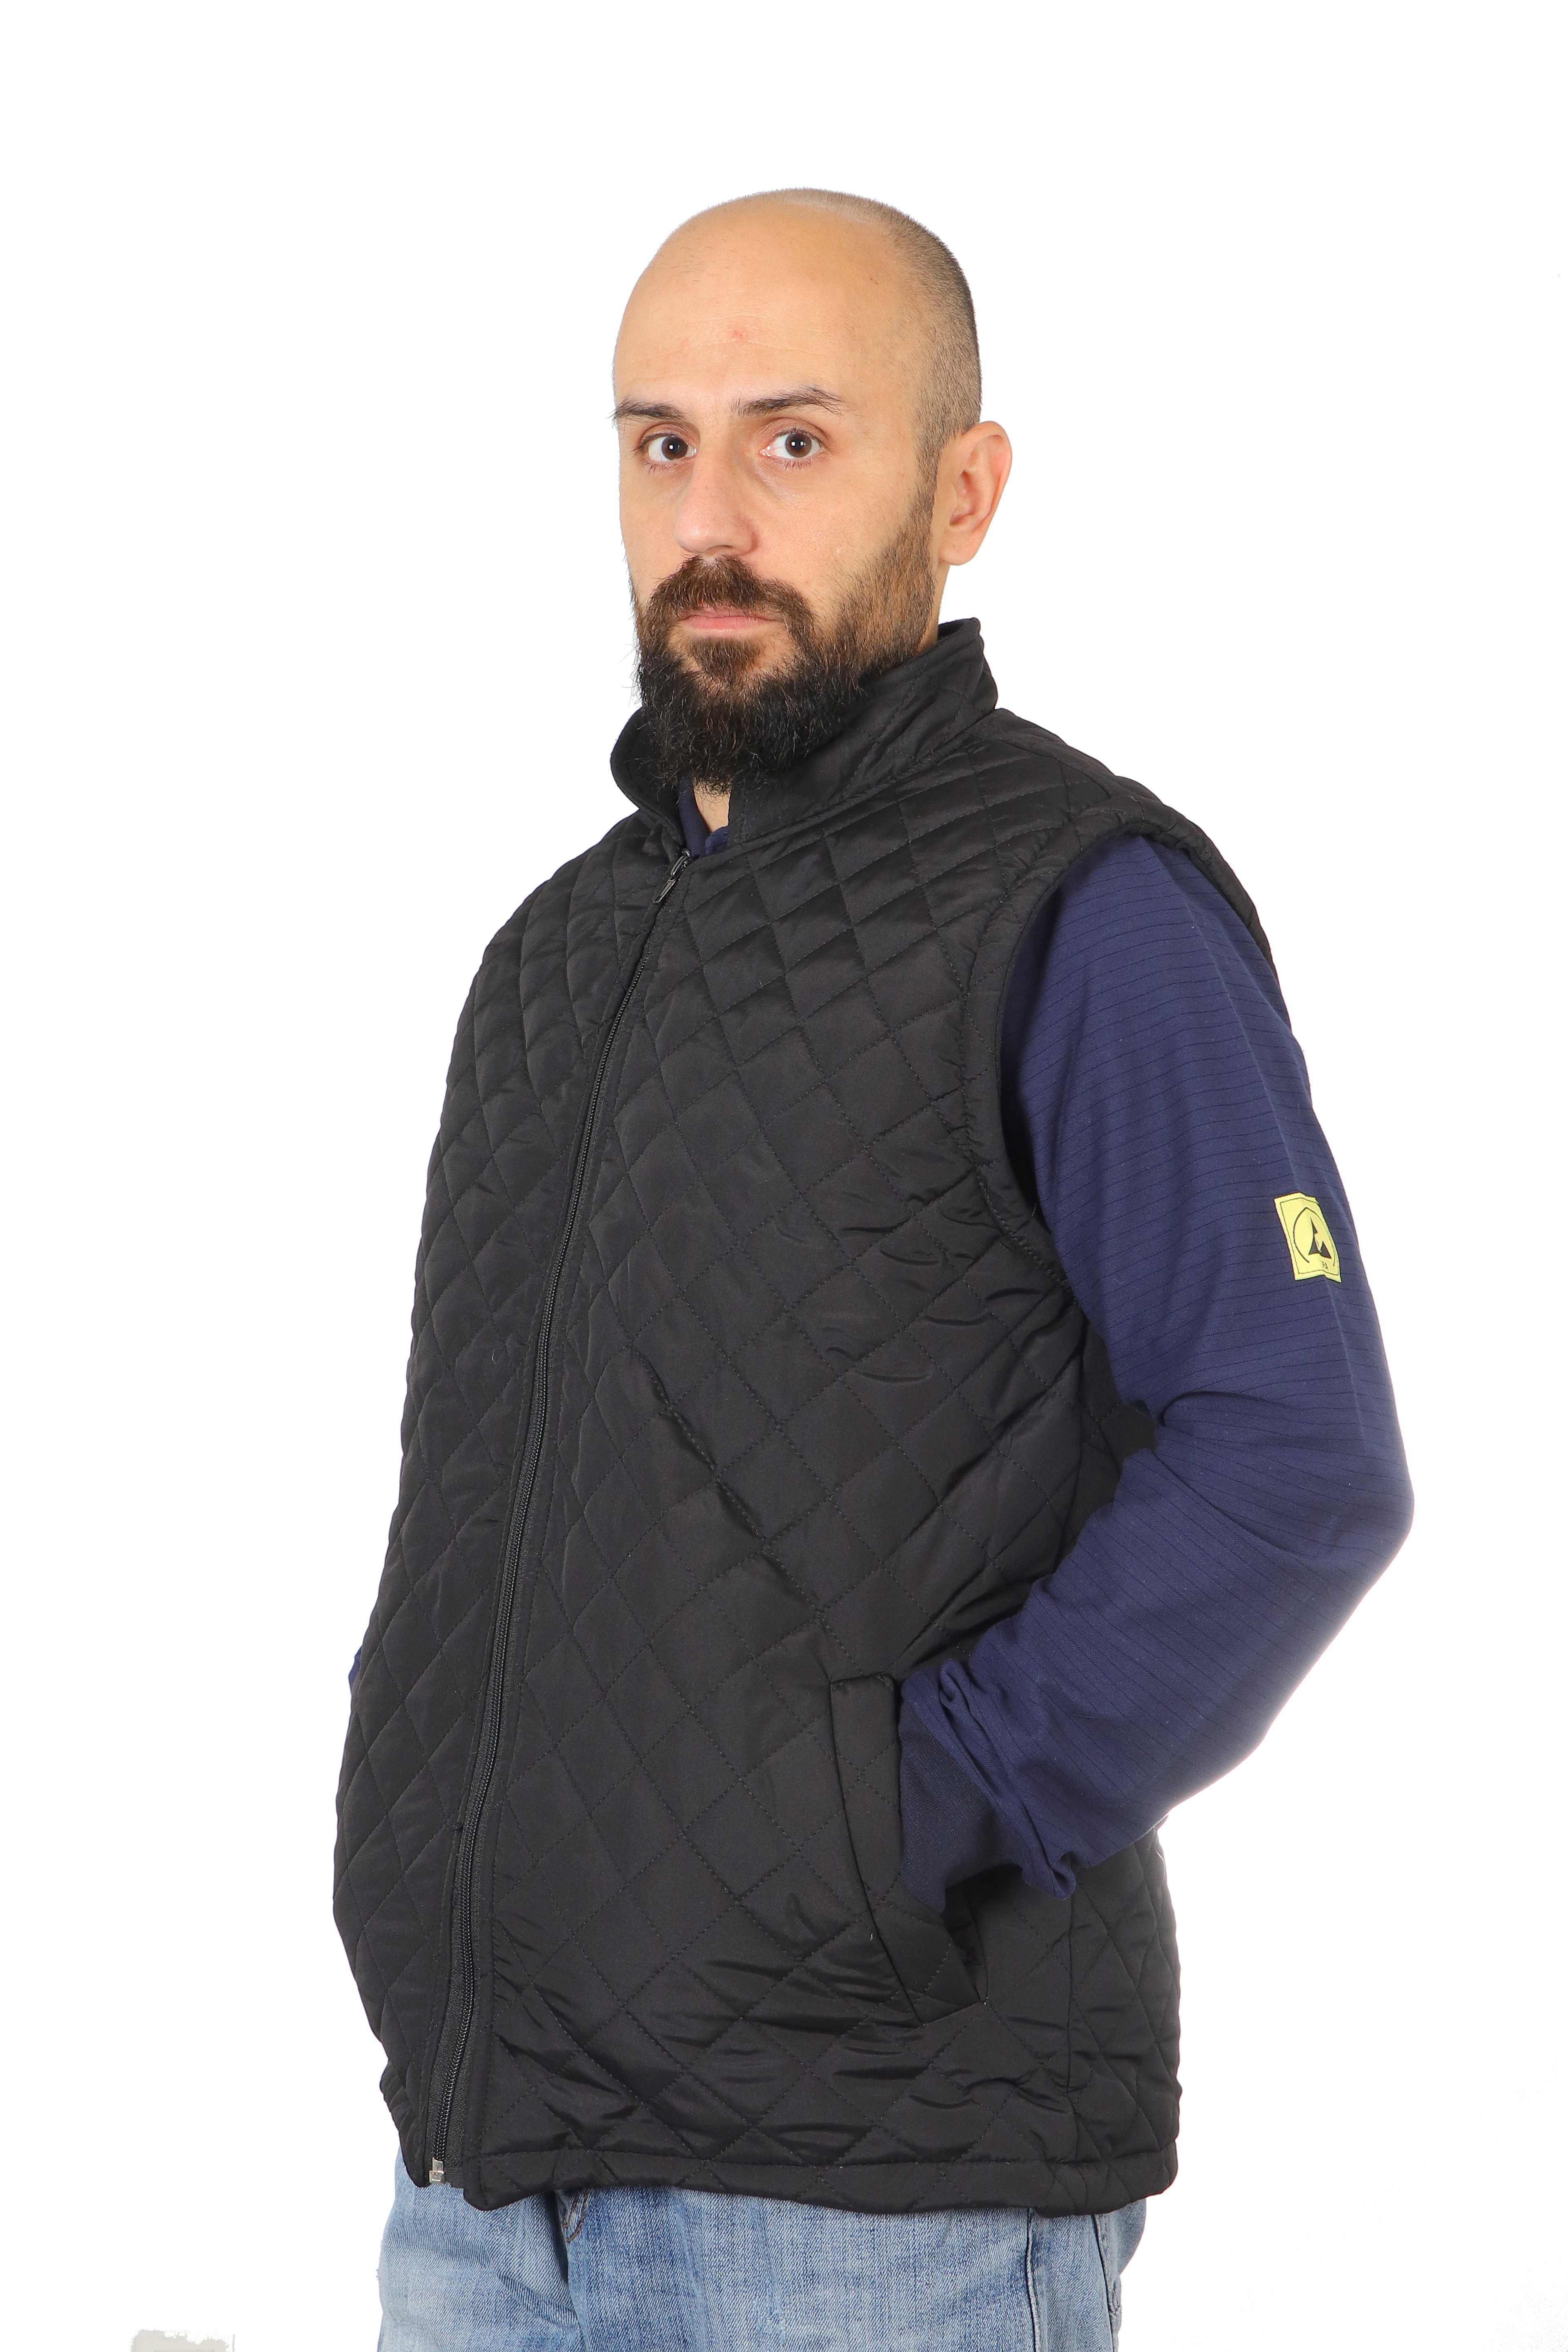 Comfortable Quilted Inflatable Work Safety Vest with Pockets and Fleece Inside Unisex  Unisex Black 1015PGSTDBLK